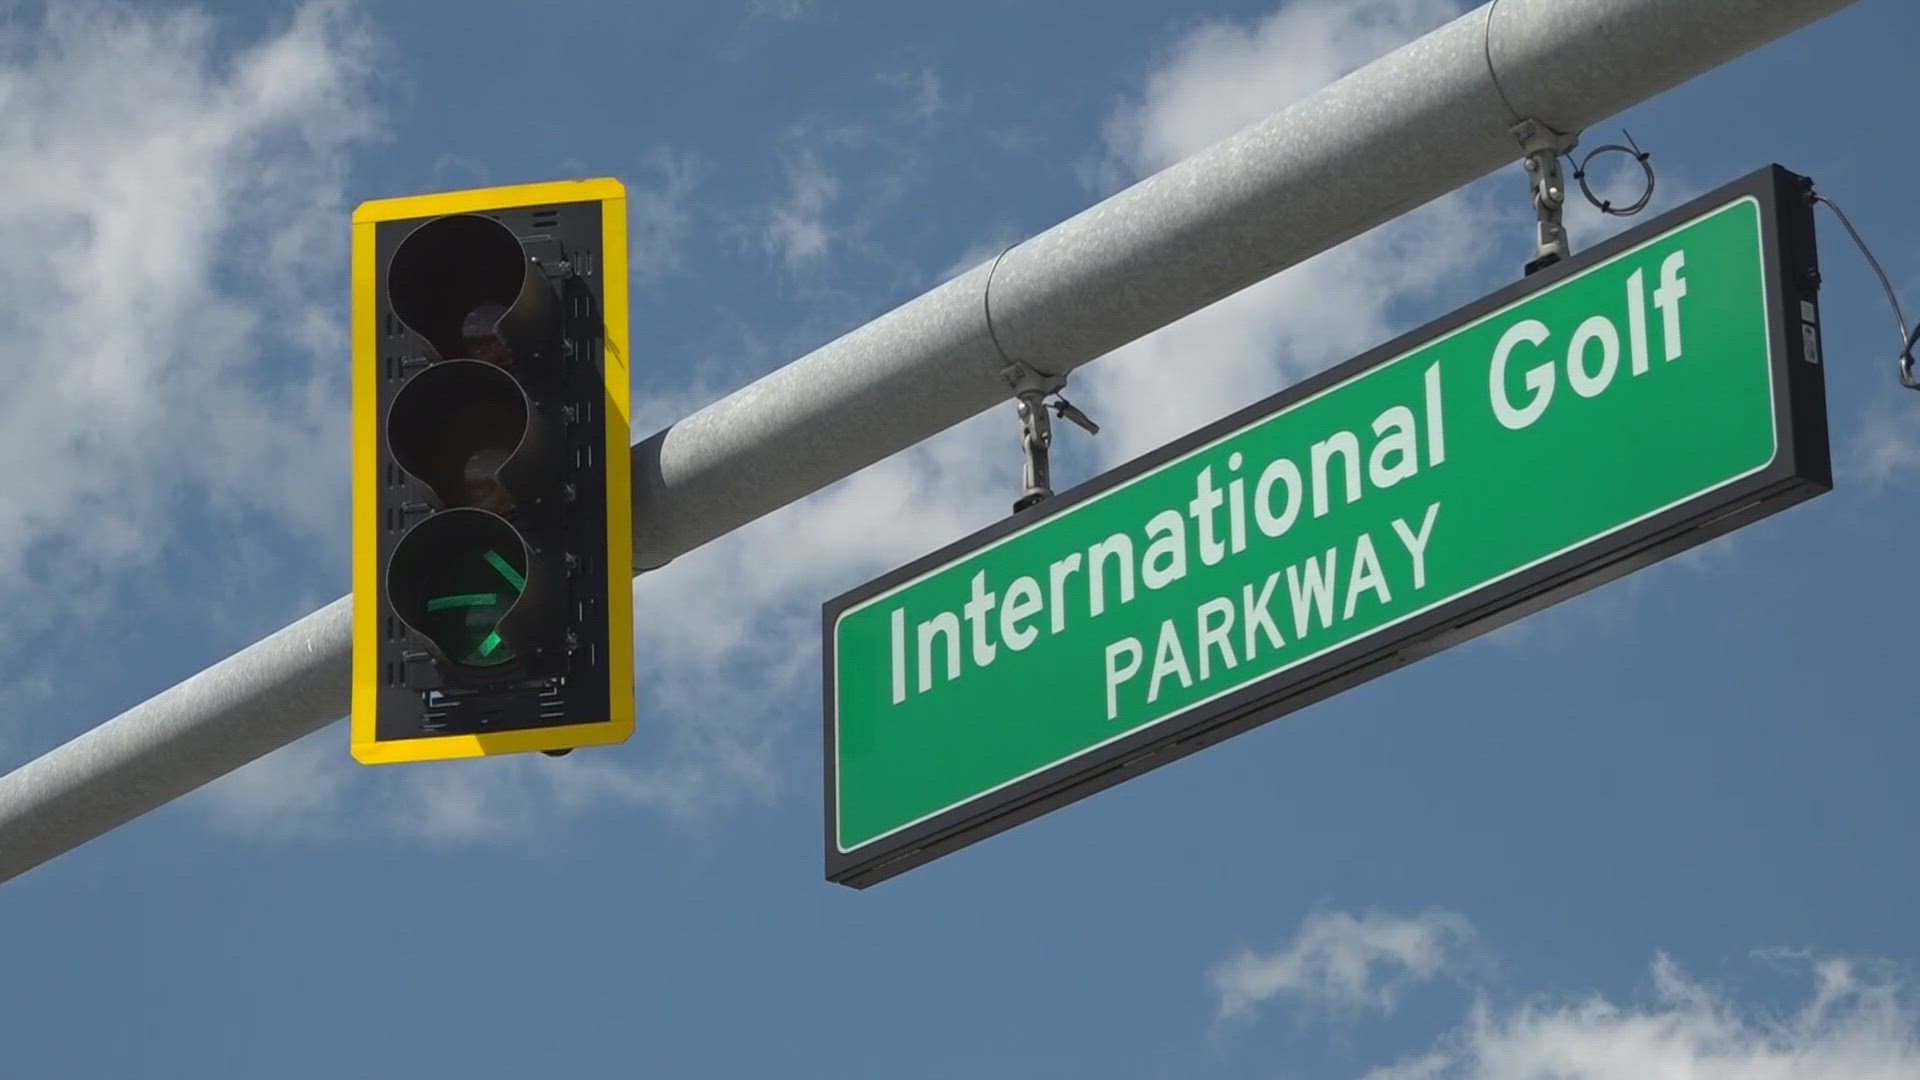 St. Johns County has confirmed there are no county plans for this International golf Parkway and World Commerce Parkway either.